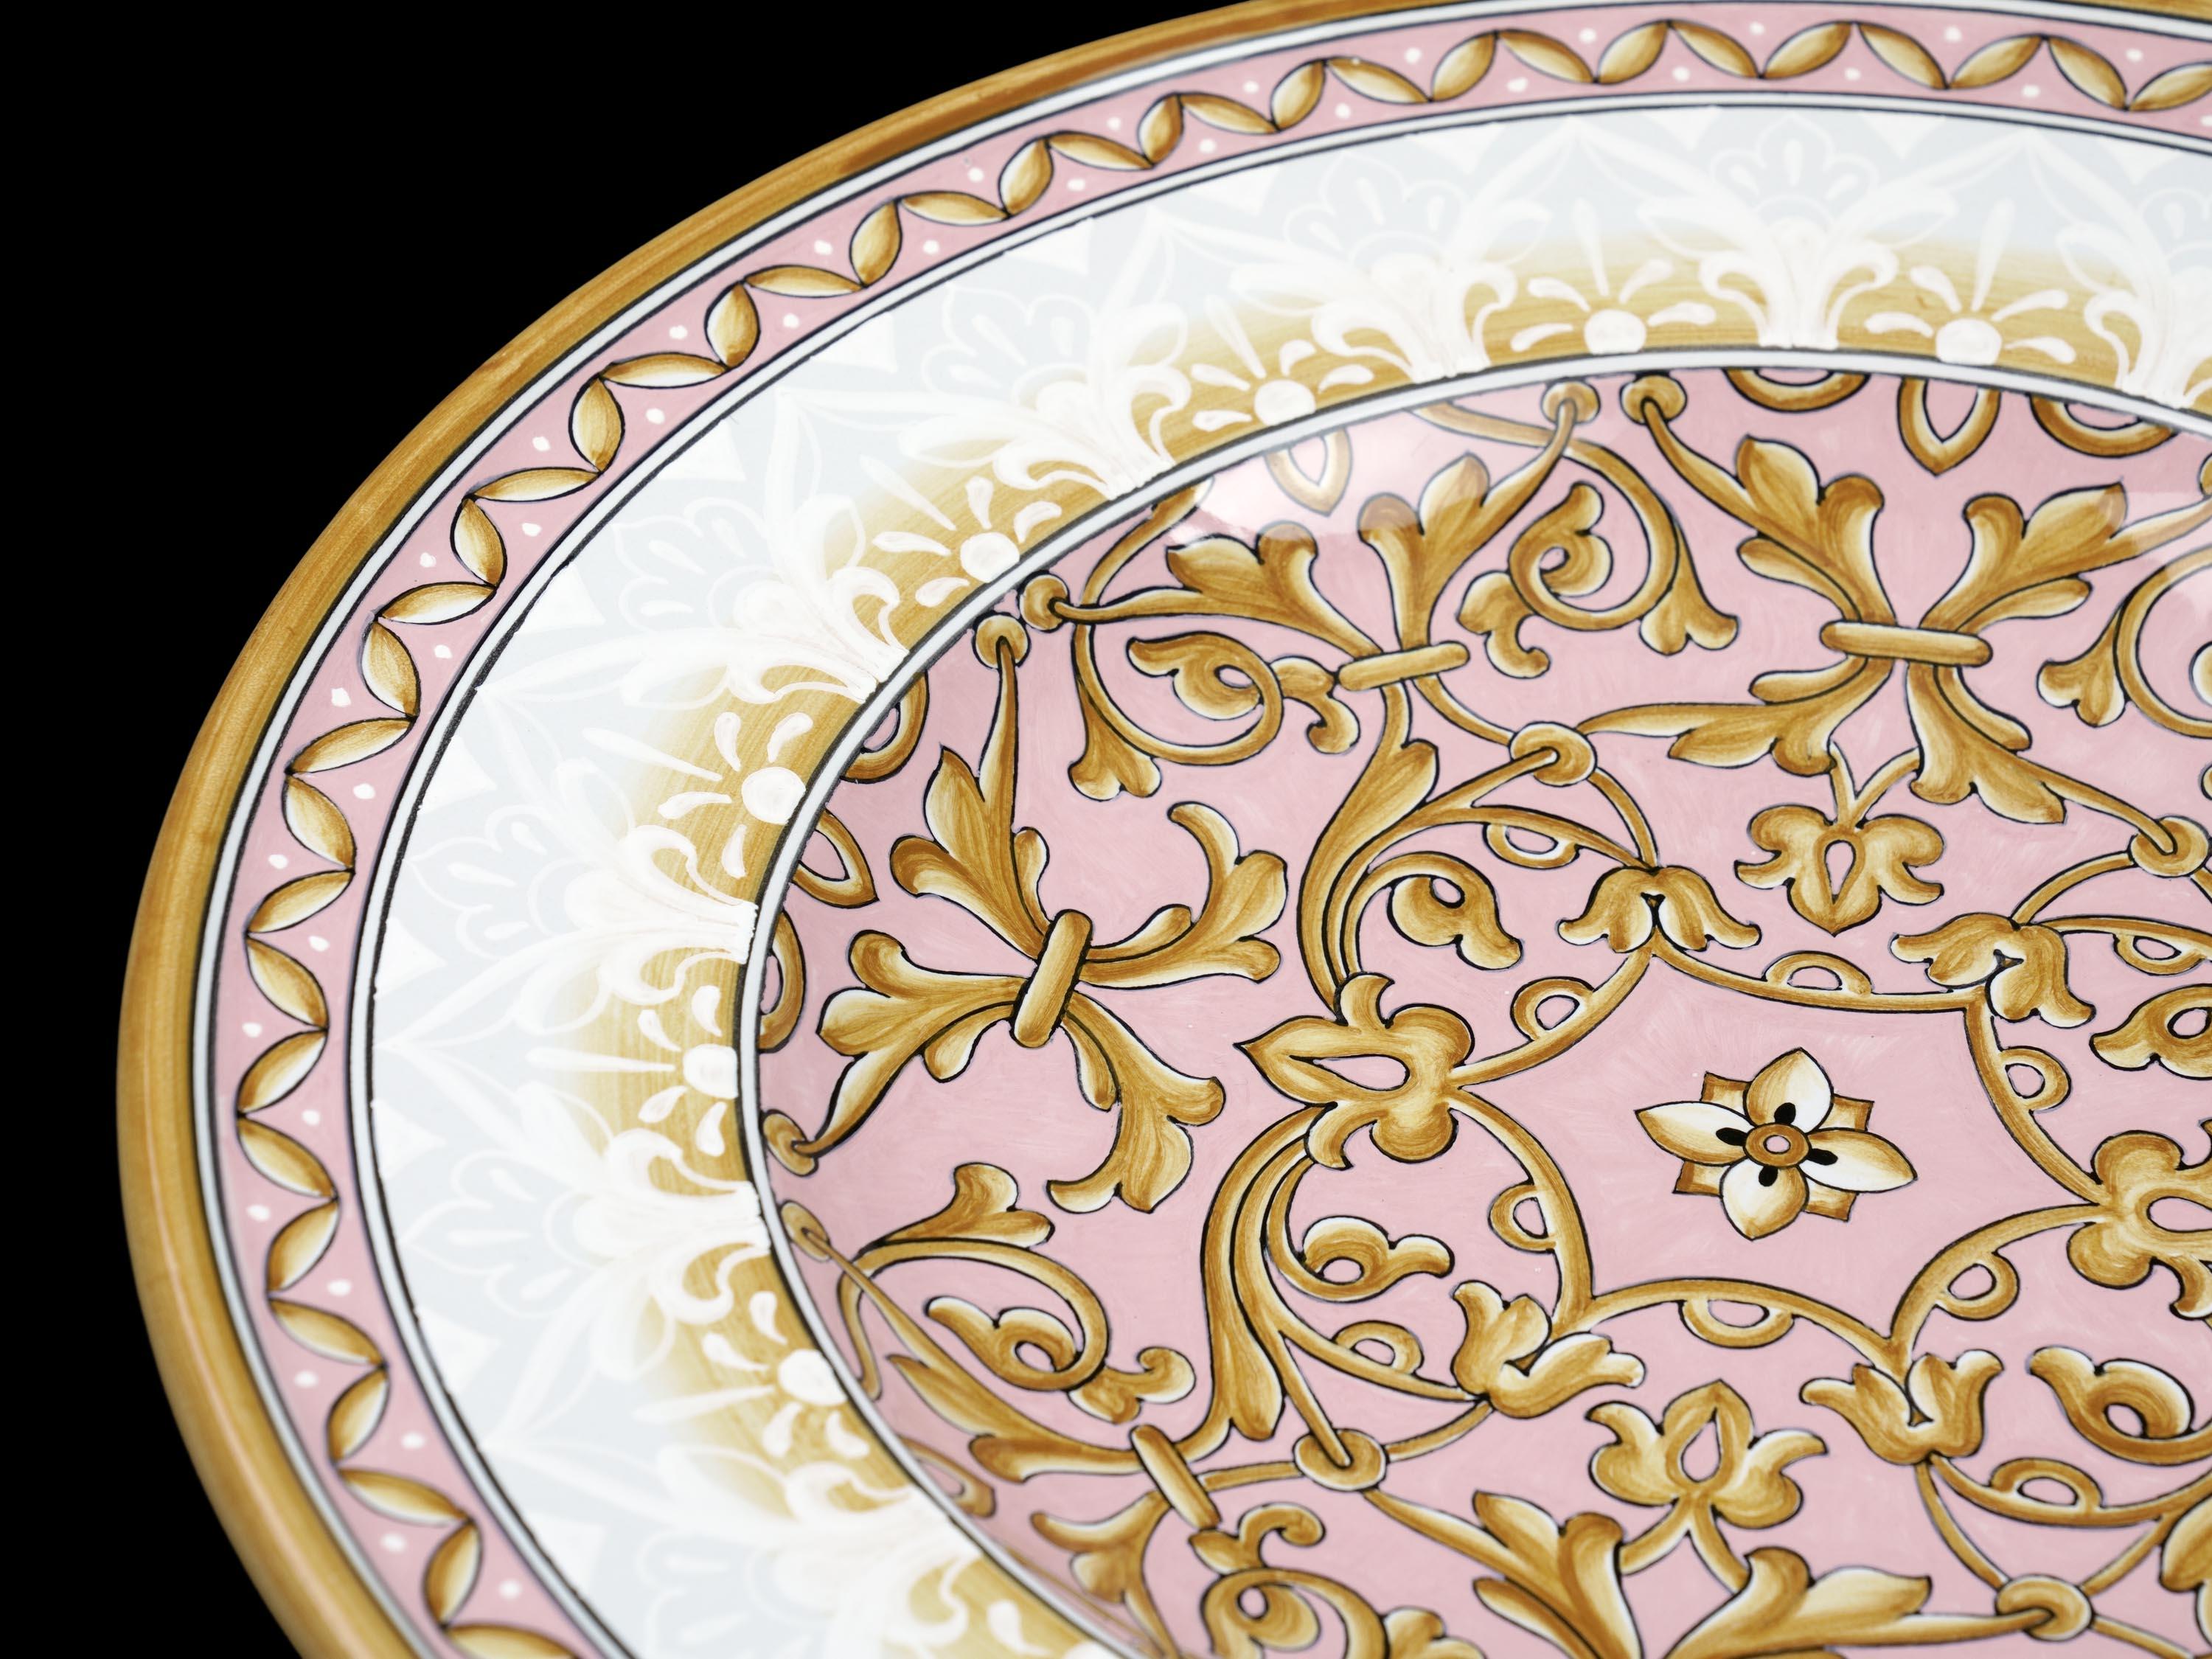 Large Ceramic Plate, Decorative Majolica Bowl Centerpiece, Pink White, In Stock For Sale 3